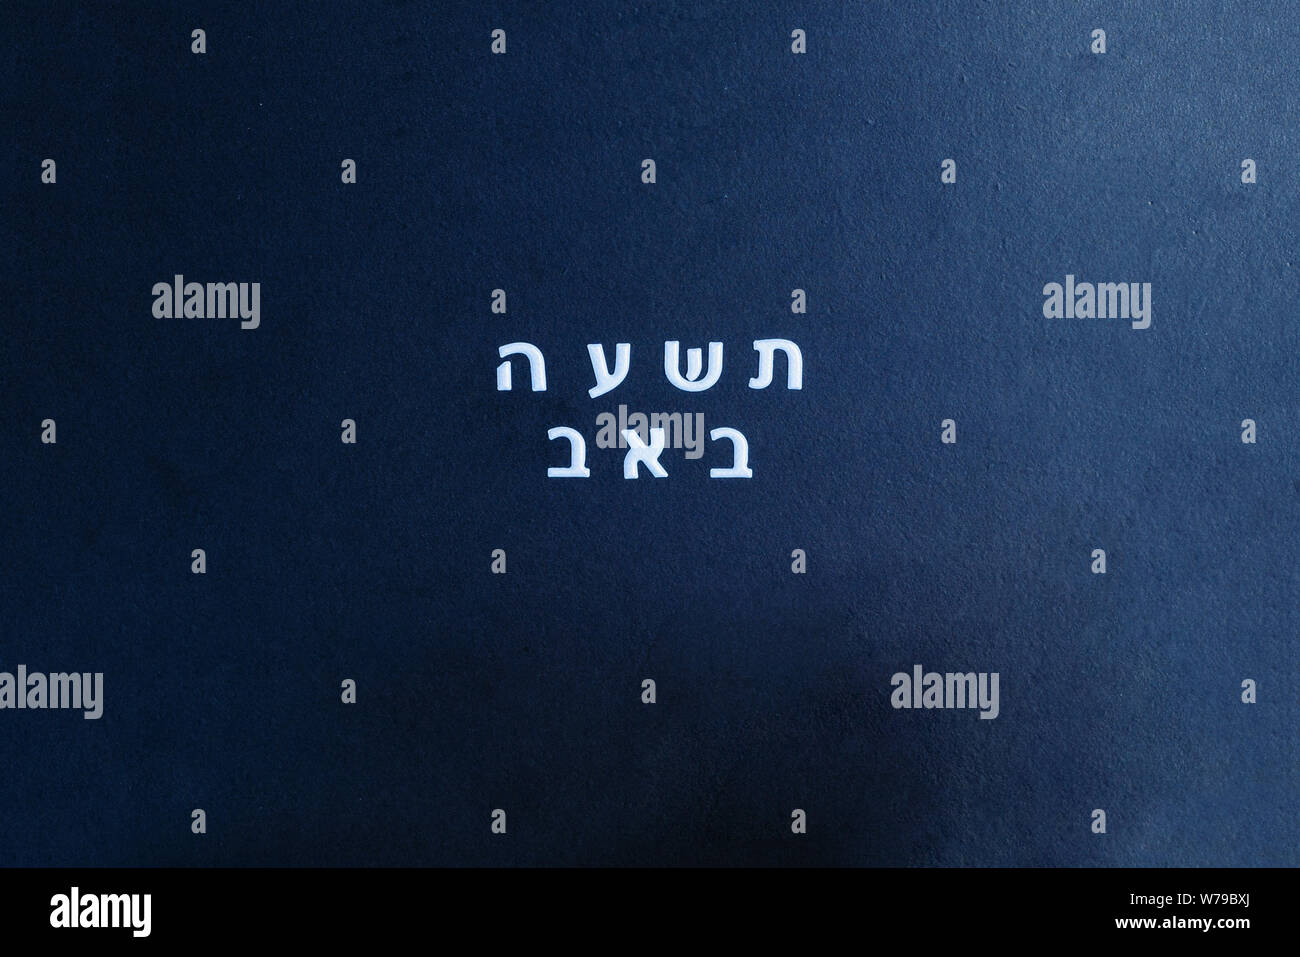 School black chalkboard with text Tisha B'Av written in hebrew. Tisha B'Av day in Judaism, on which a number of disasters in Jewish history occurred. Stock Photo